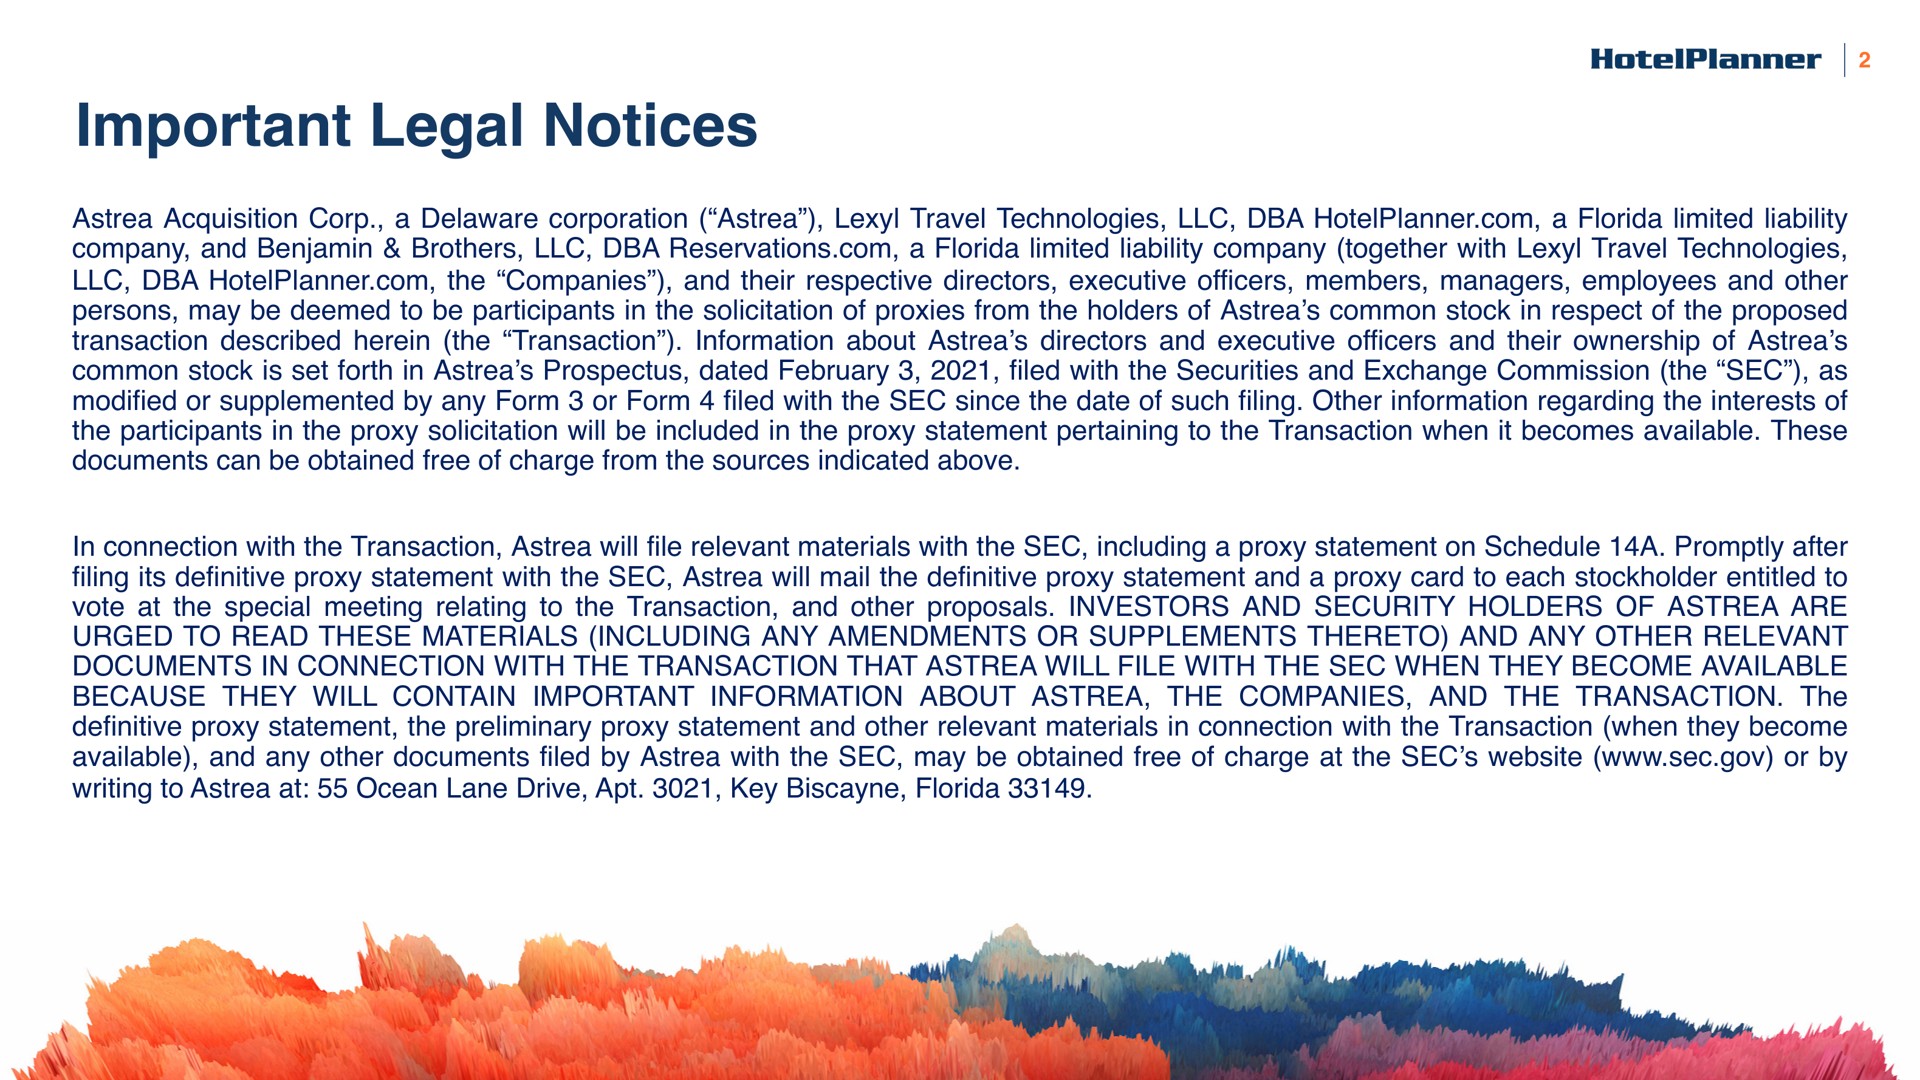 important legal notices | HotelPlanner